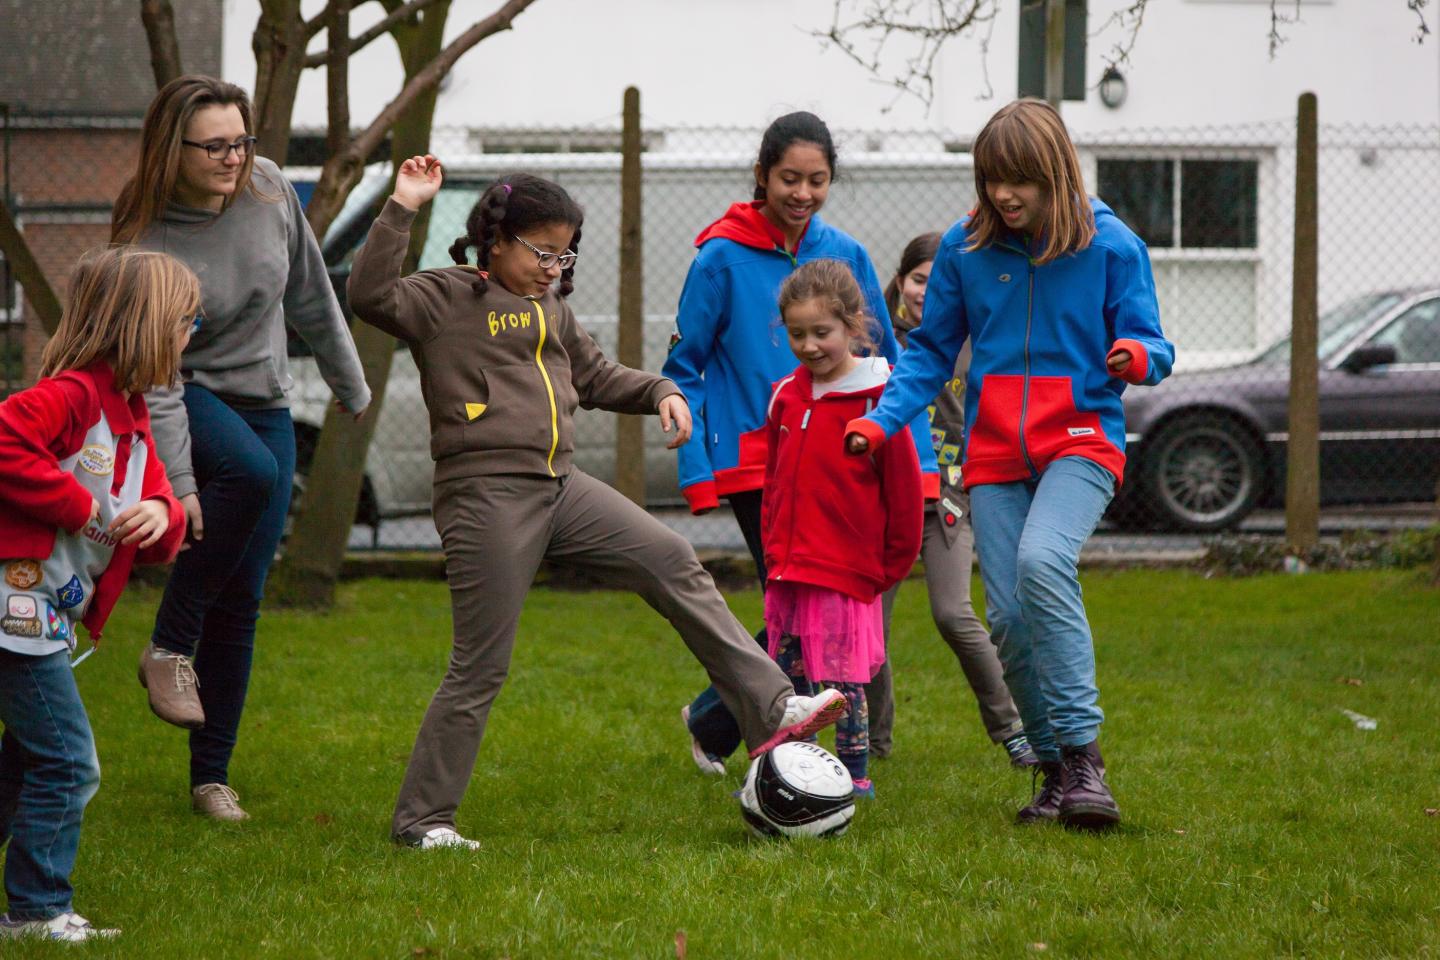 Girls from Rainbows, Brownies, Guides and Senior Section Play Football